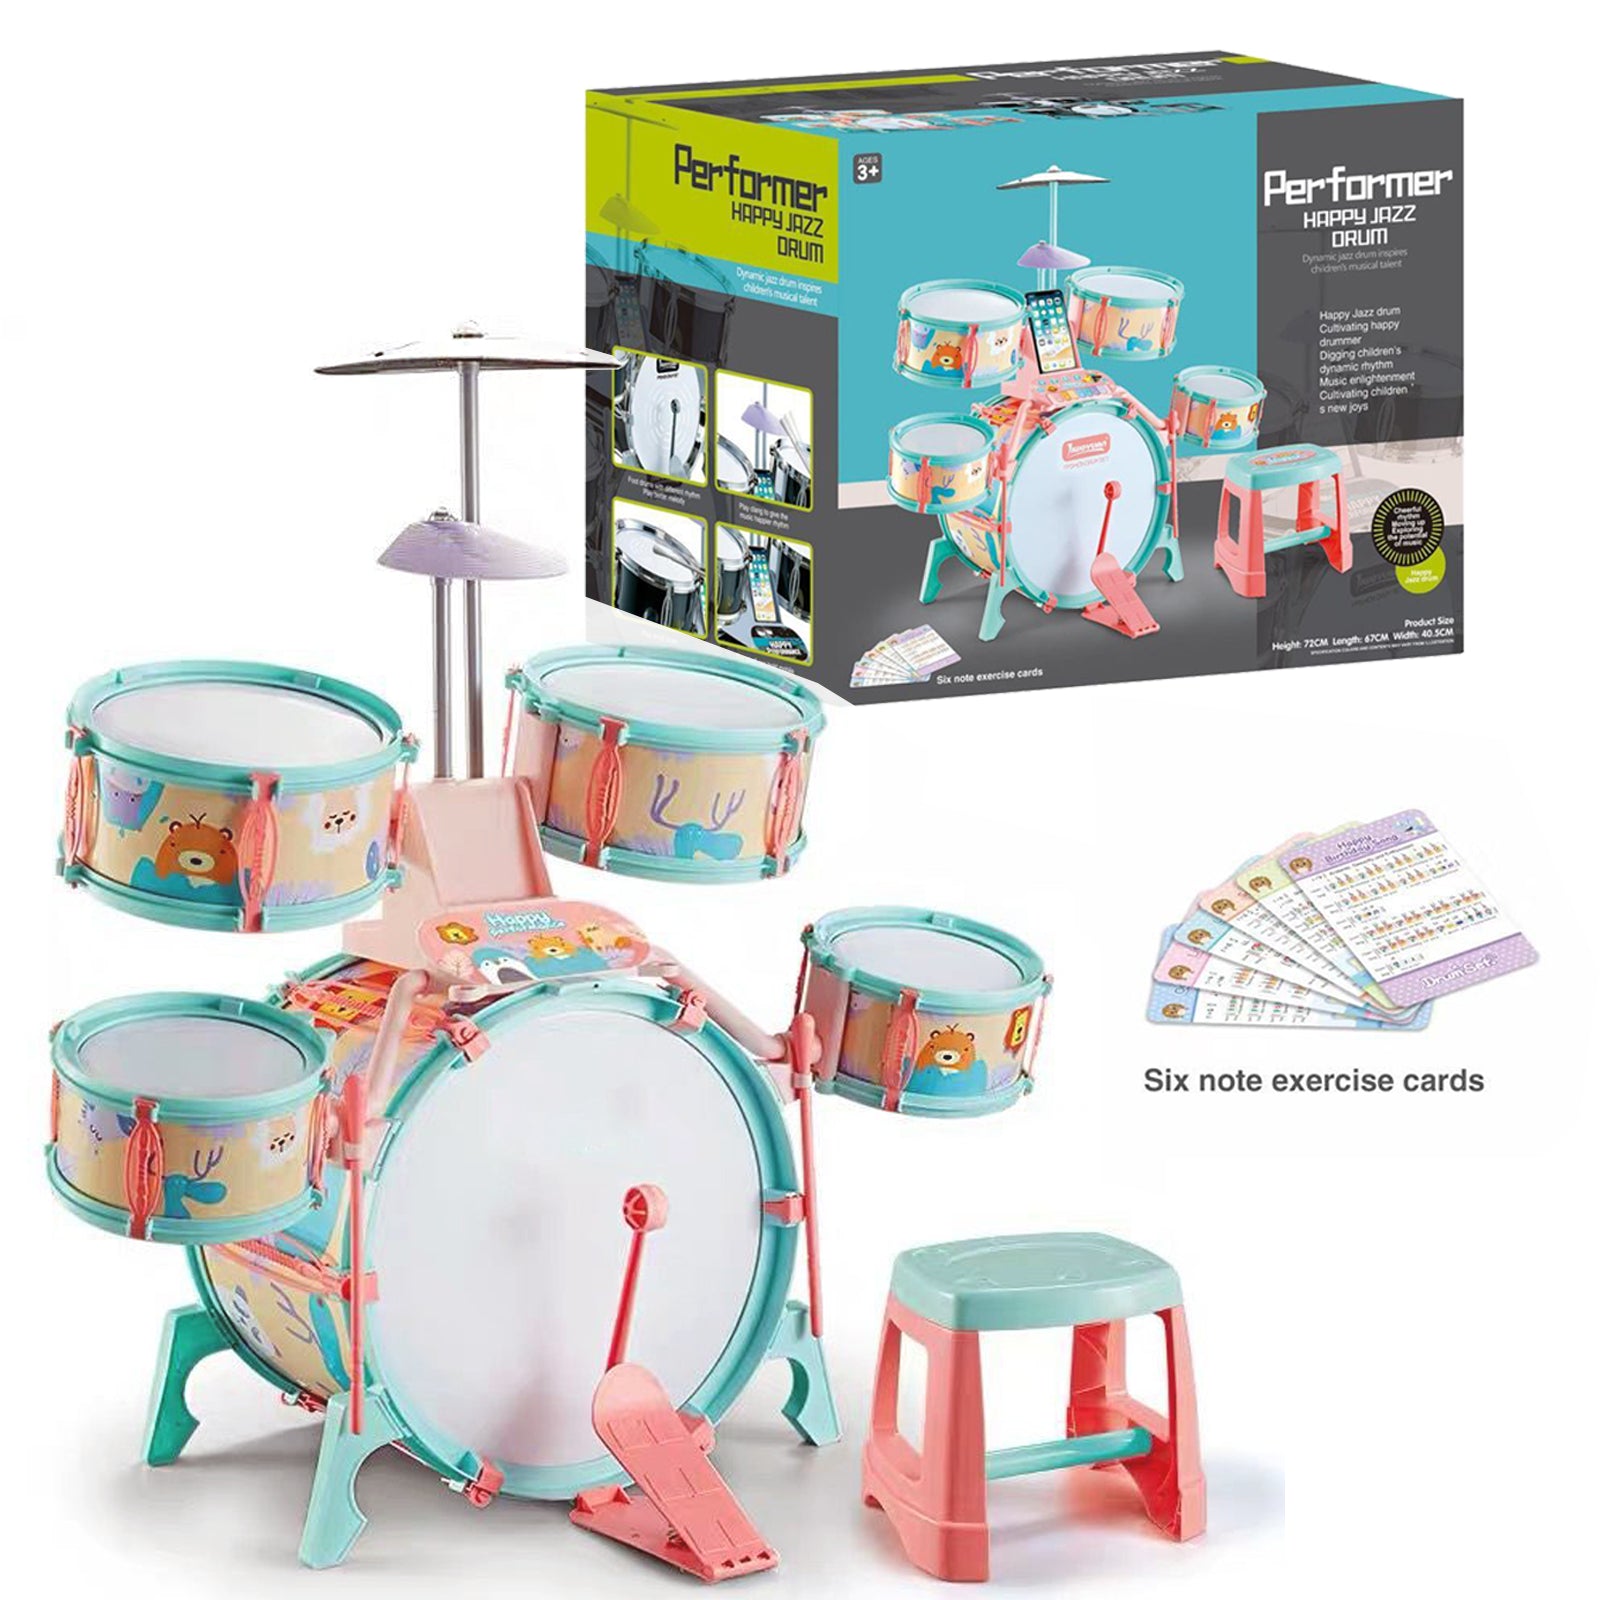 Pink and Green Multi functional Kids Jazz Drum Set by The Magic Toy Shop - UKBuyZone